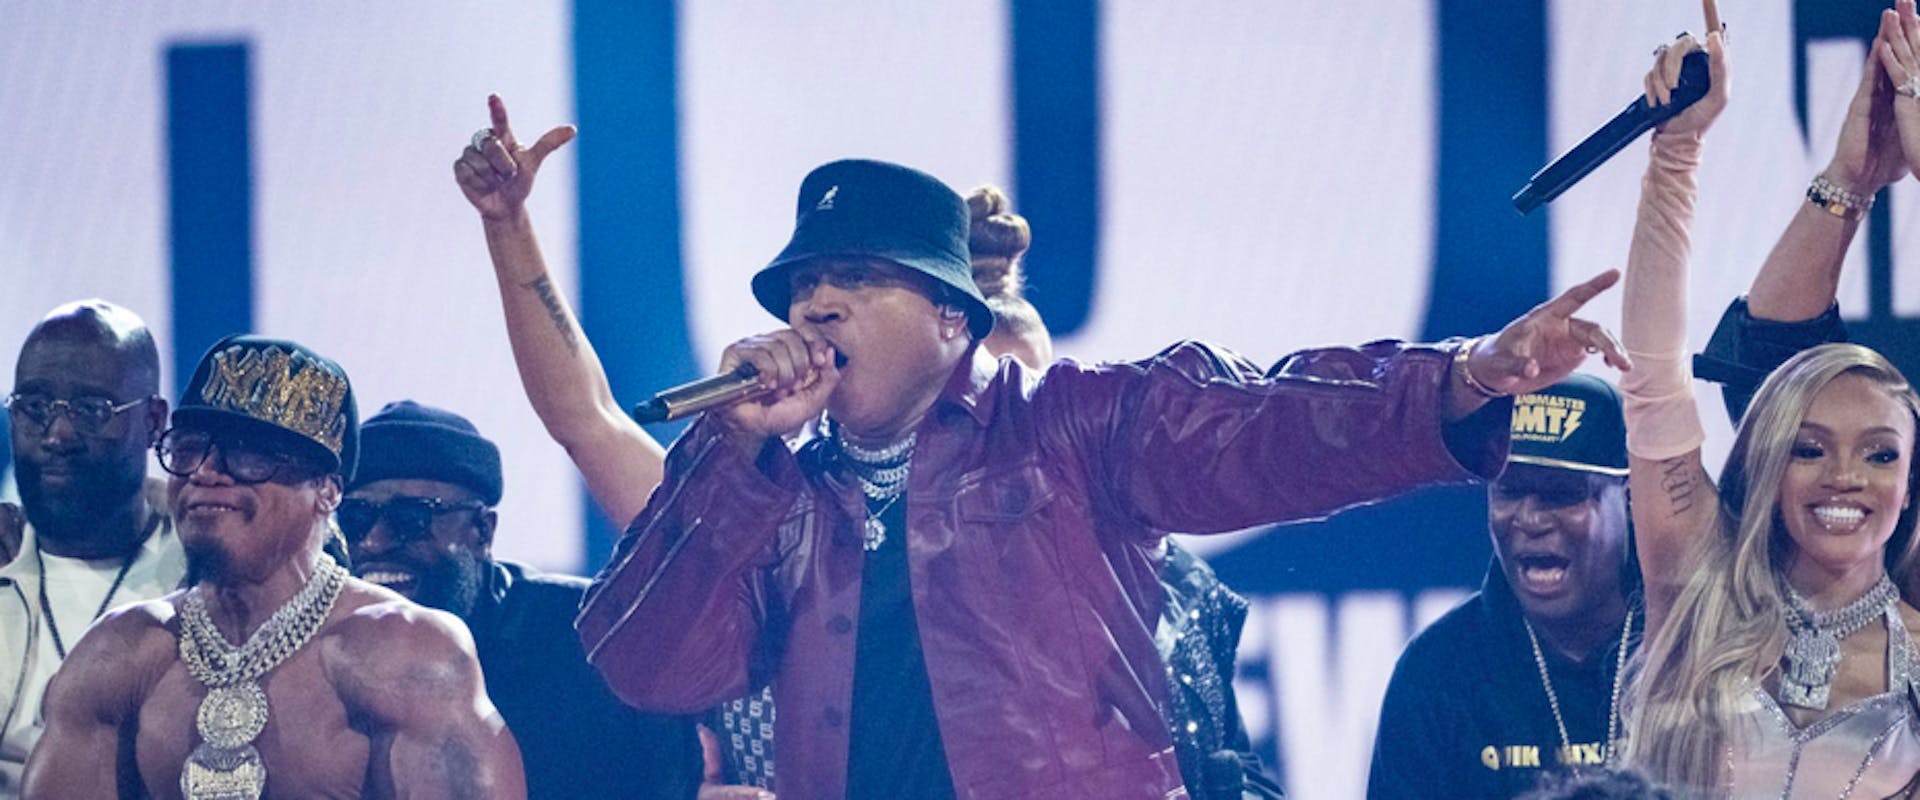 LOS ANGELES, CALIFORNIA - FEBRUARY 05: (FOR EDITORIAL USE ONLY) (L-R) Melle Mel, LL Cool J and GloRilla performs during the 65th GRAMMY Awards at Crypto.com Arena on February 05, 2023 in Los Angeles, California. 